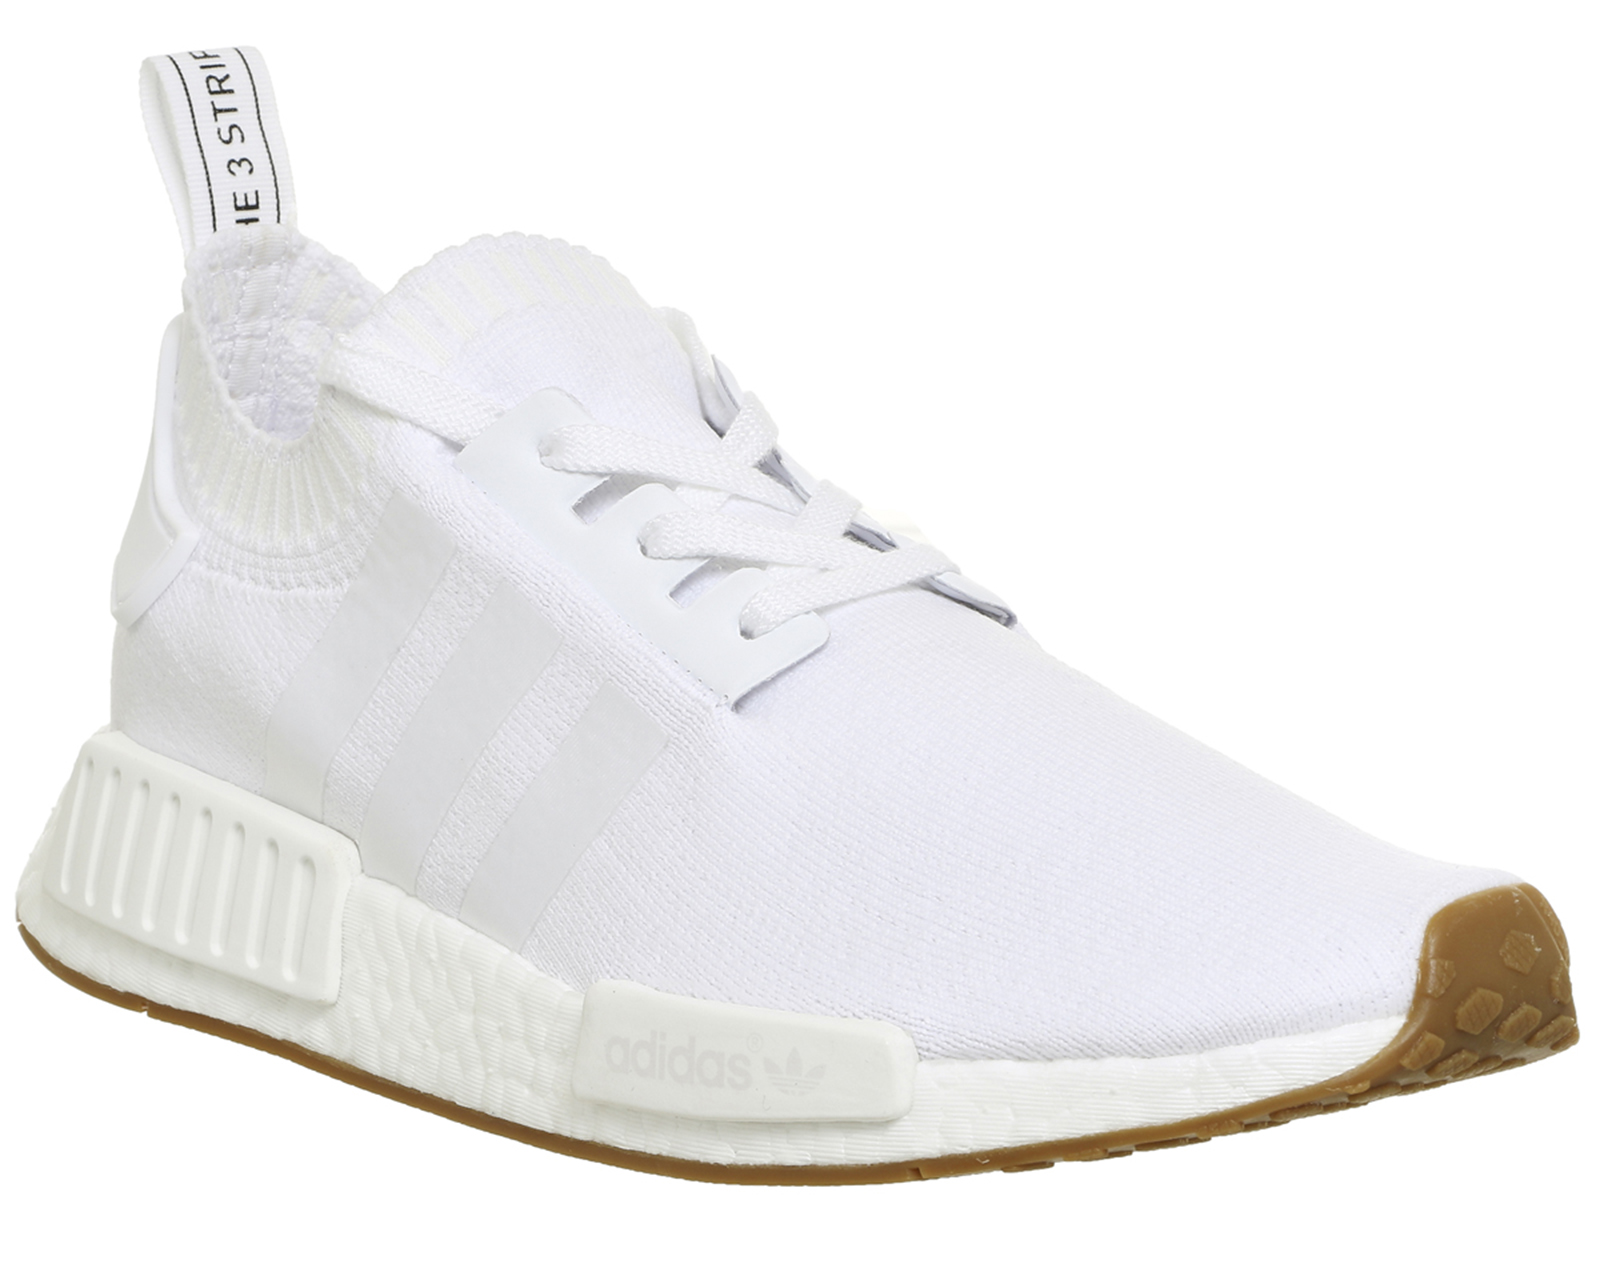 adidas Nmd R1 Prime Knit White White Gum - His trainers